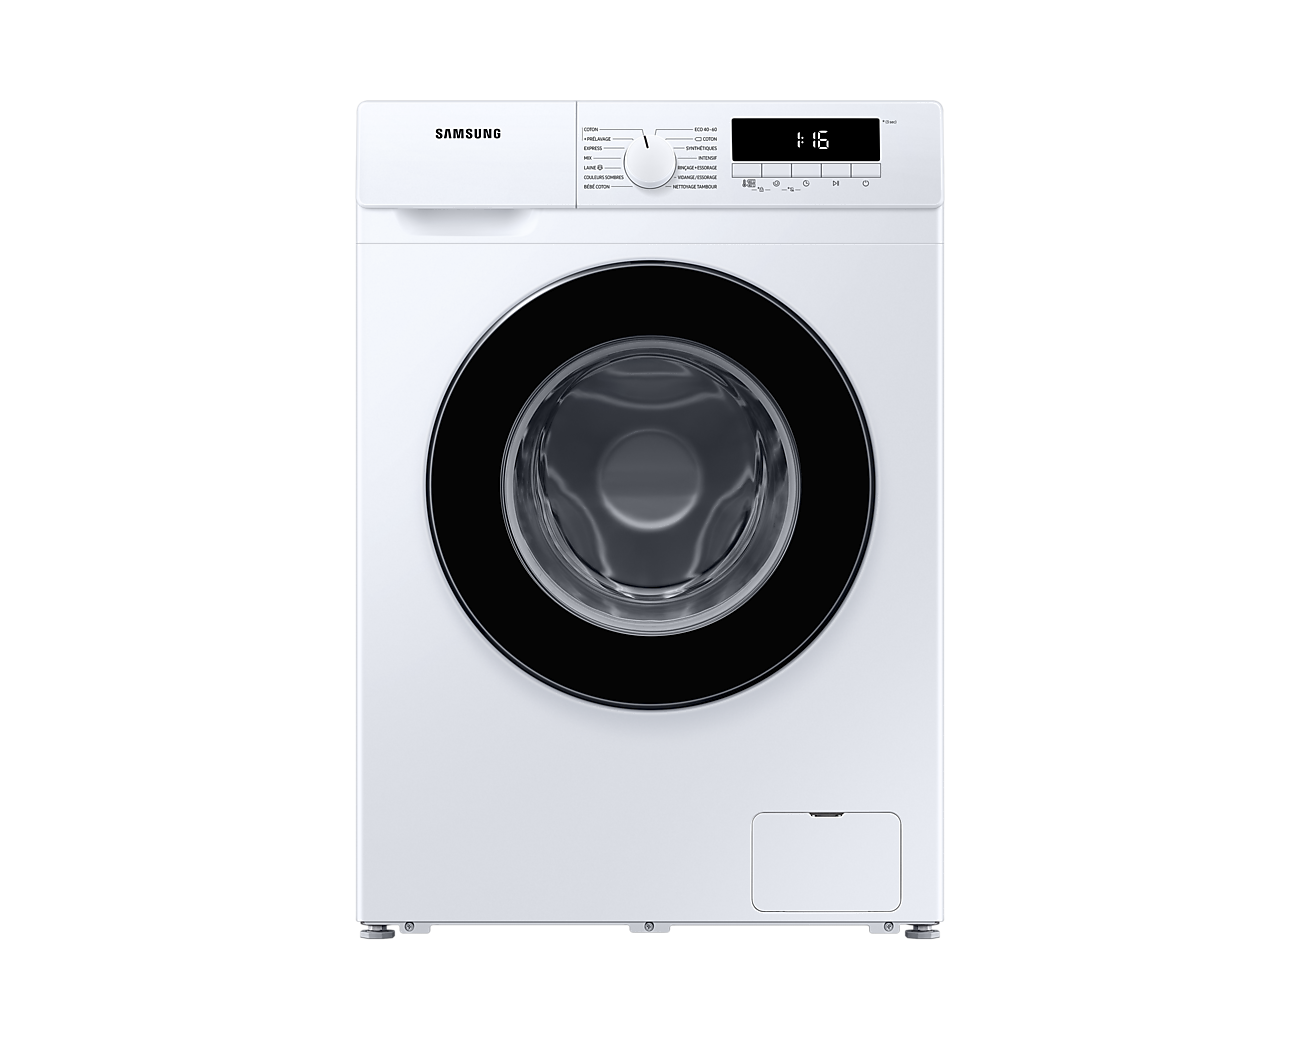 Samsung WW70J3283 Front Loading with Quick Wash, Drum Clean, Delay End, 7Kg